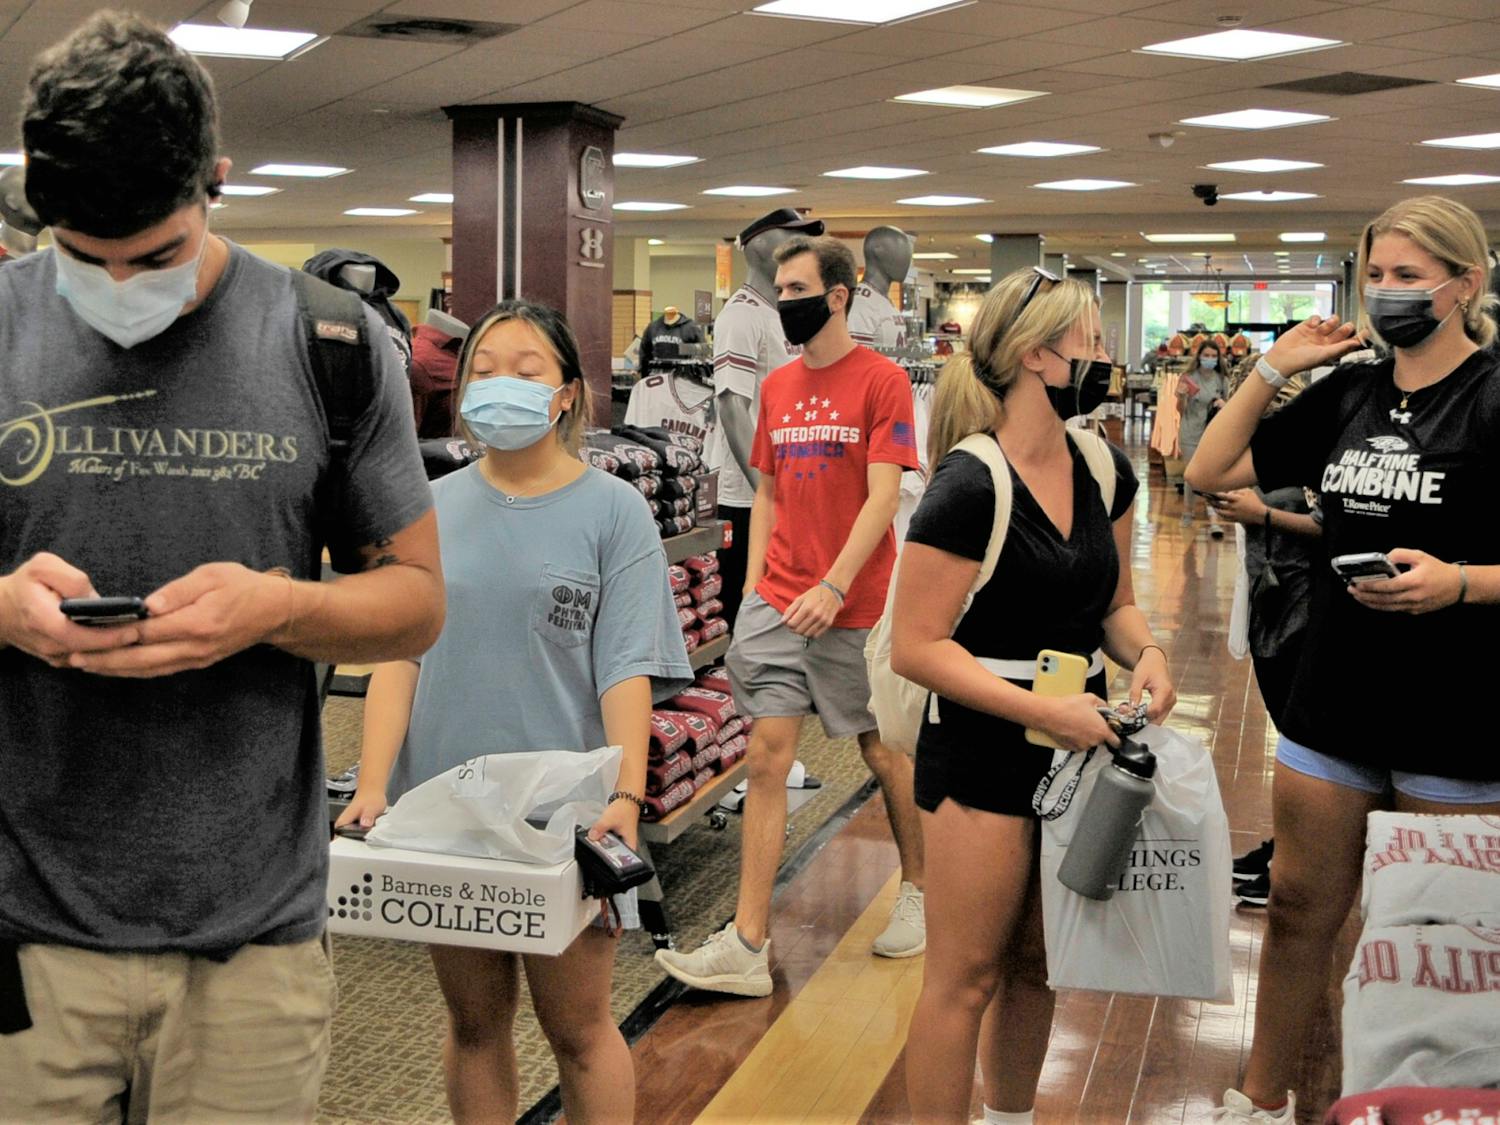 Students wear masks at the USC bookstore while waiting in line to pick up textbooks and course materials. On Feb. 21, 2022, USC announced they are only requiring masks in instructional, research and medical spaces on campus, as well as on-campus public transportation.